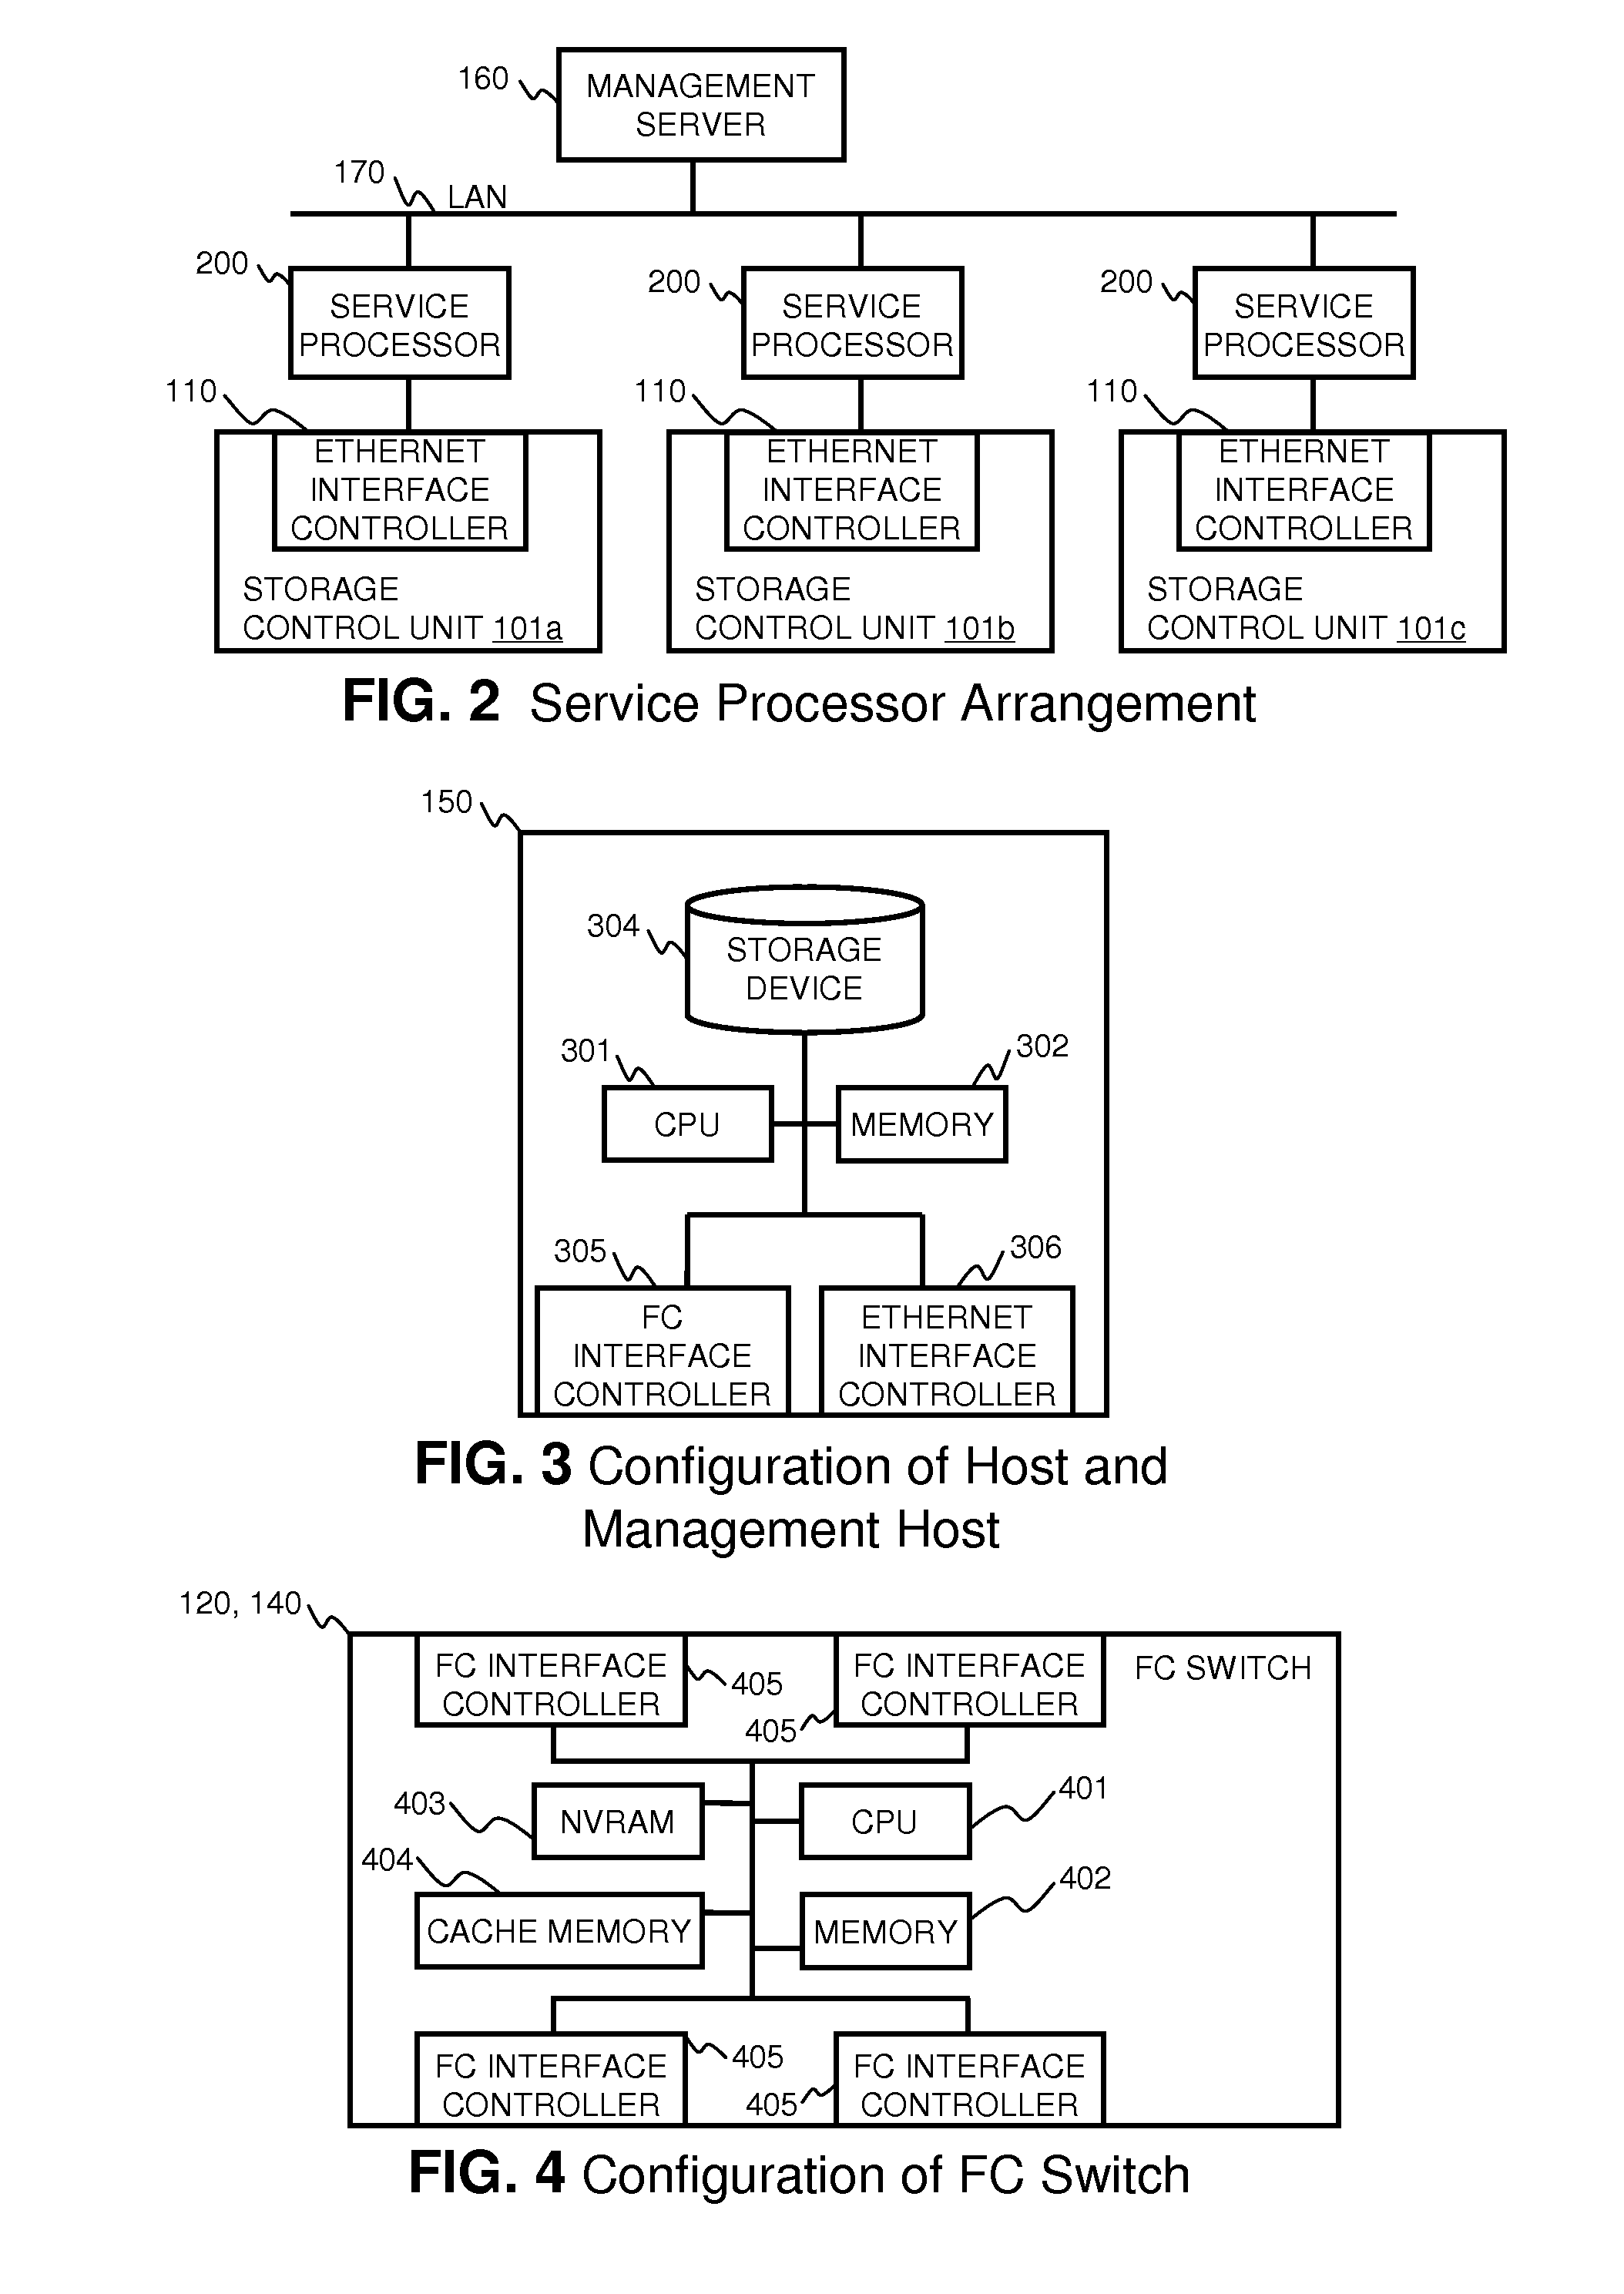 Avoiding use of an inter-unit network in a storage system having multiple storage control units